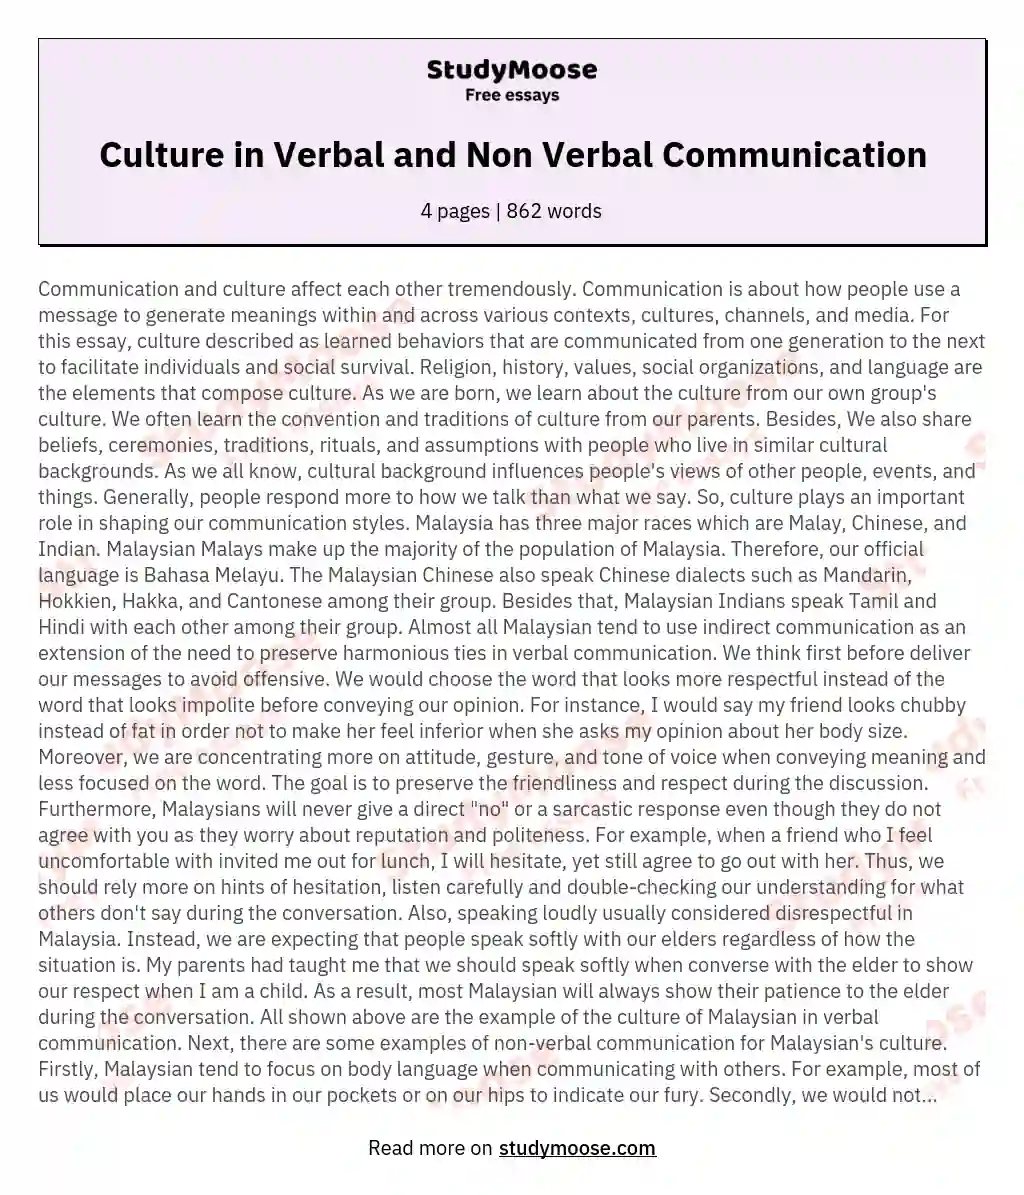 Culture in Verbal and Non Verbal Communication